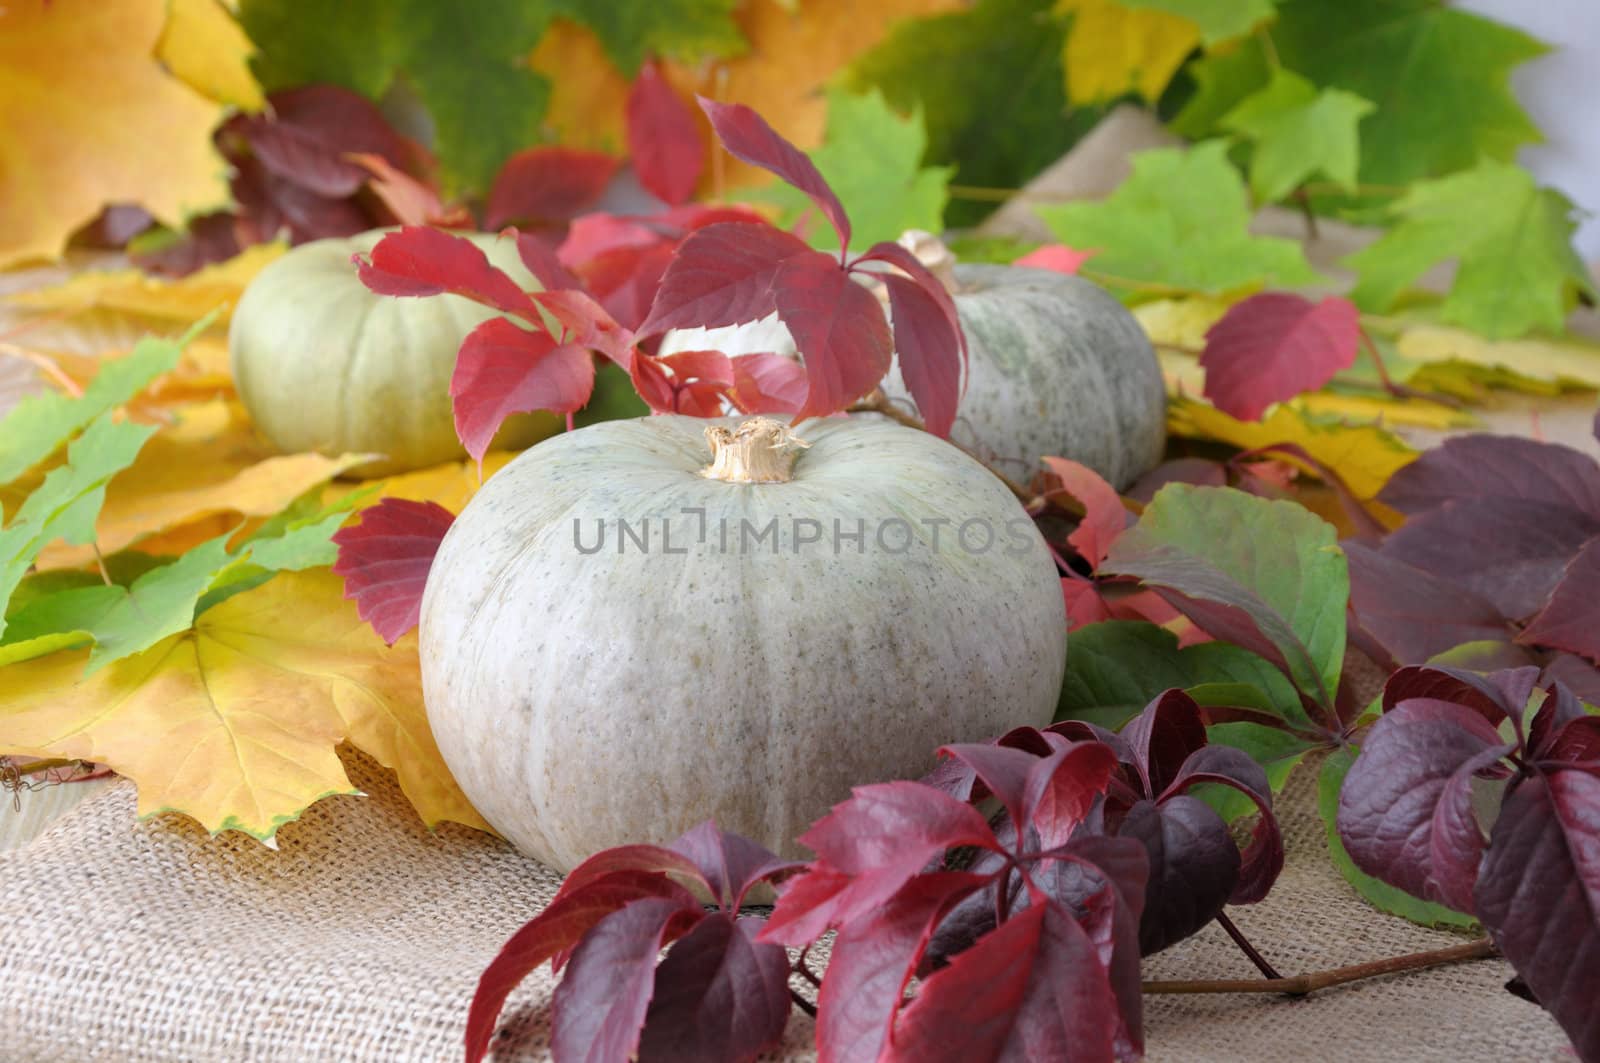 Small gray pumpkin on the background of autumn leaves